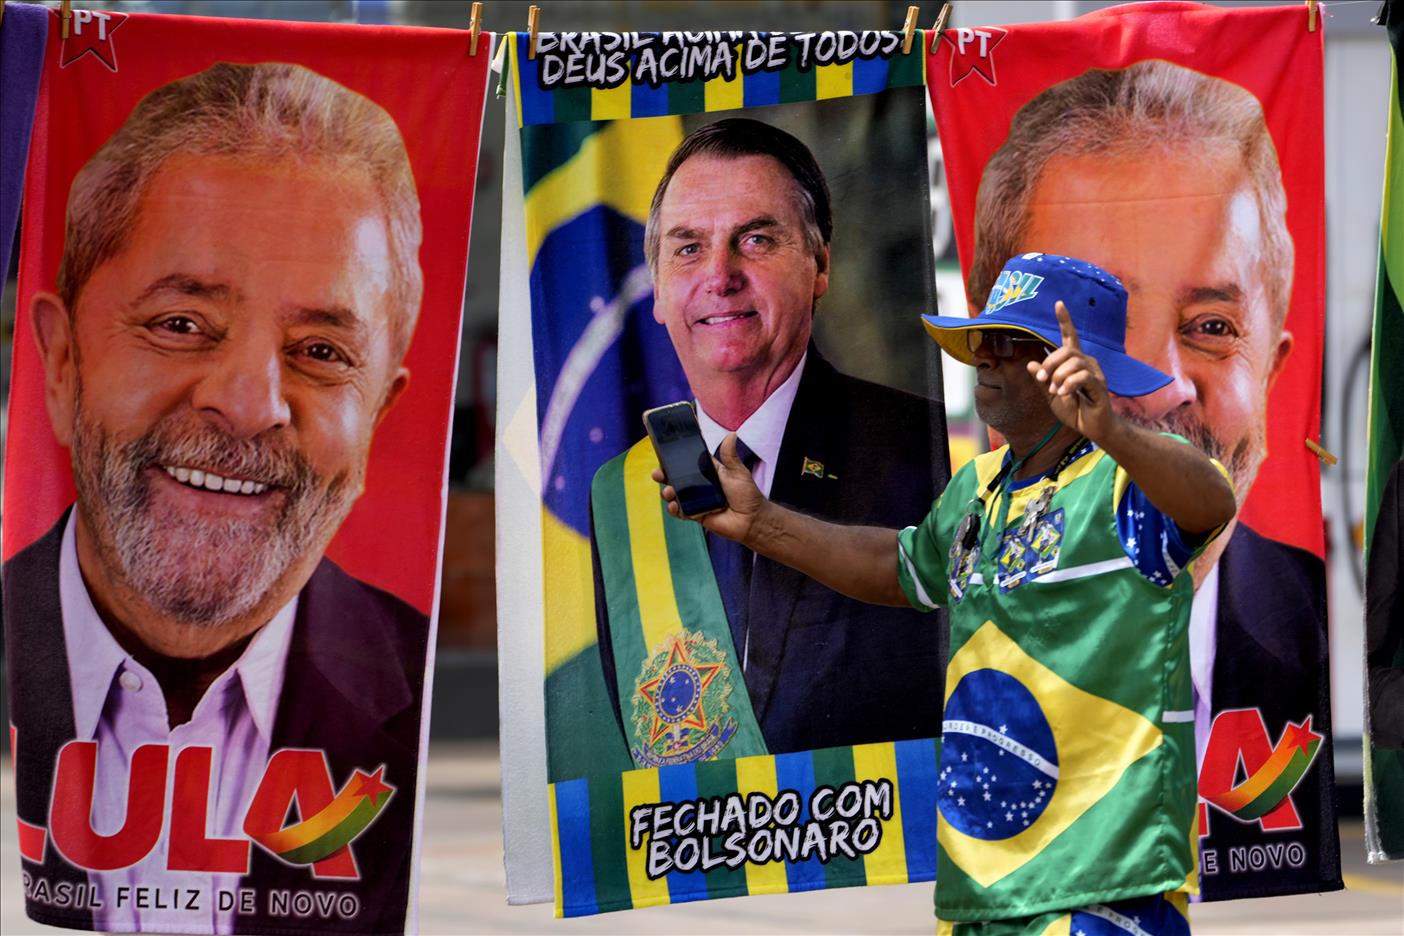 Another Stress Test For Democracy: The Imminent Election Crisis In Brazil